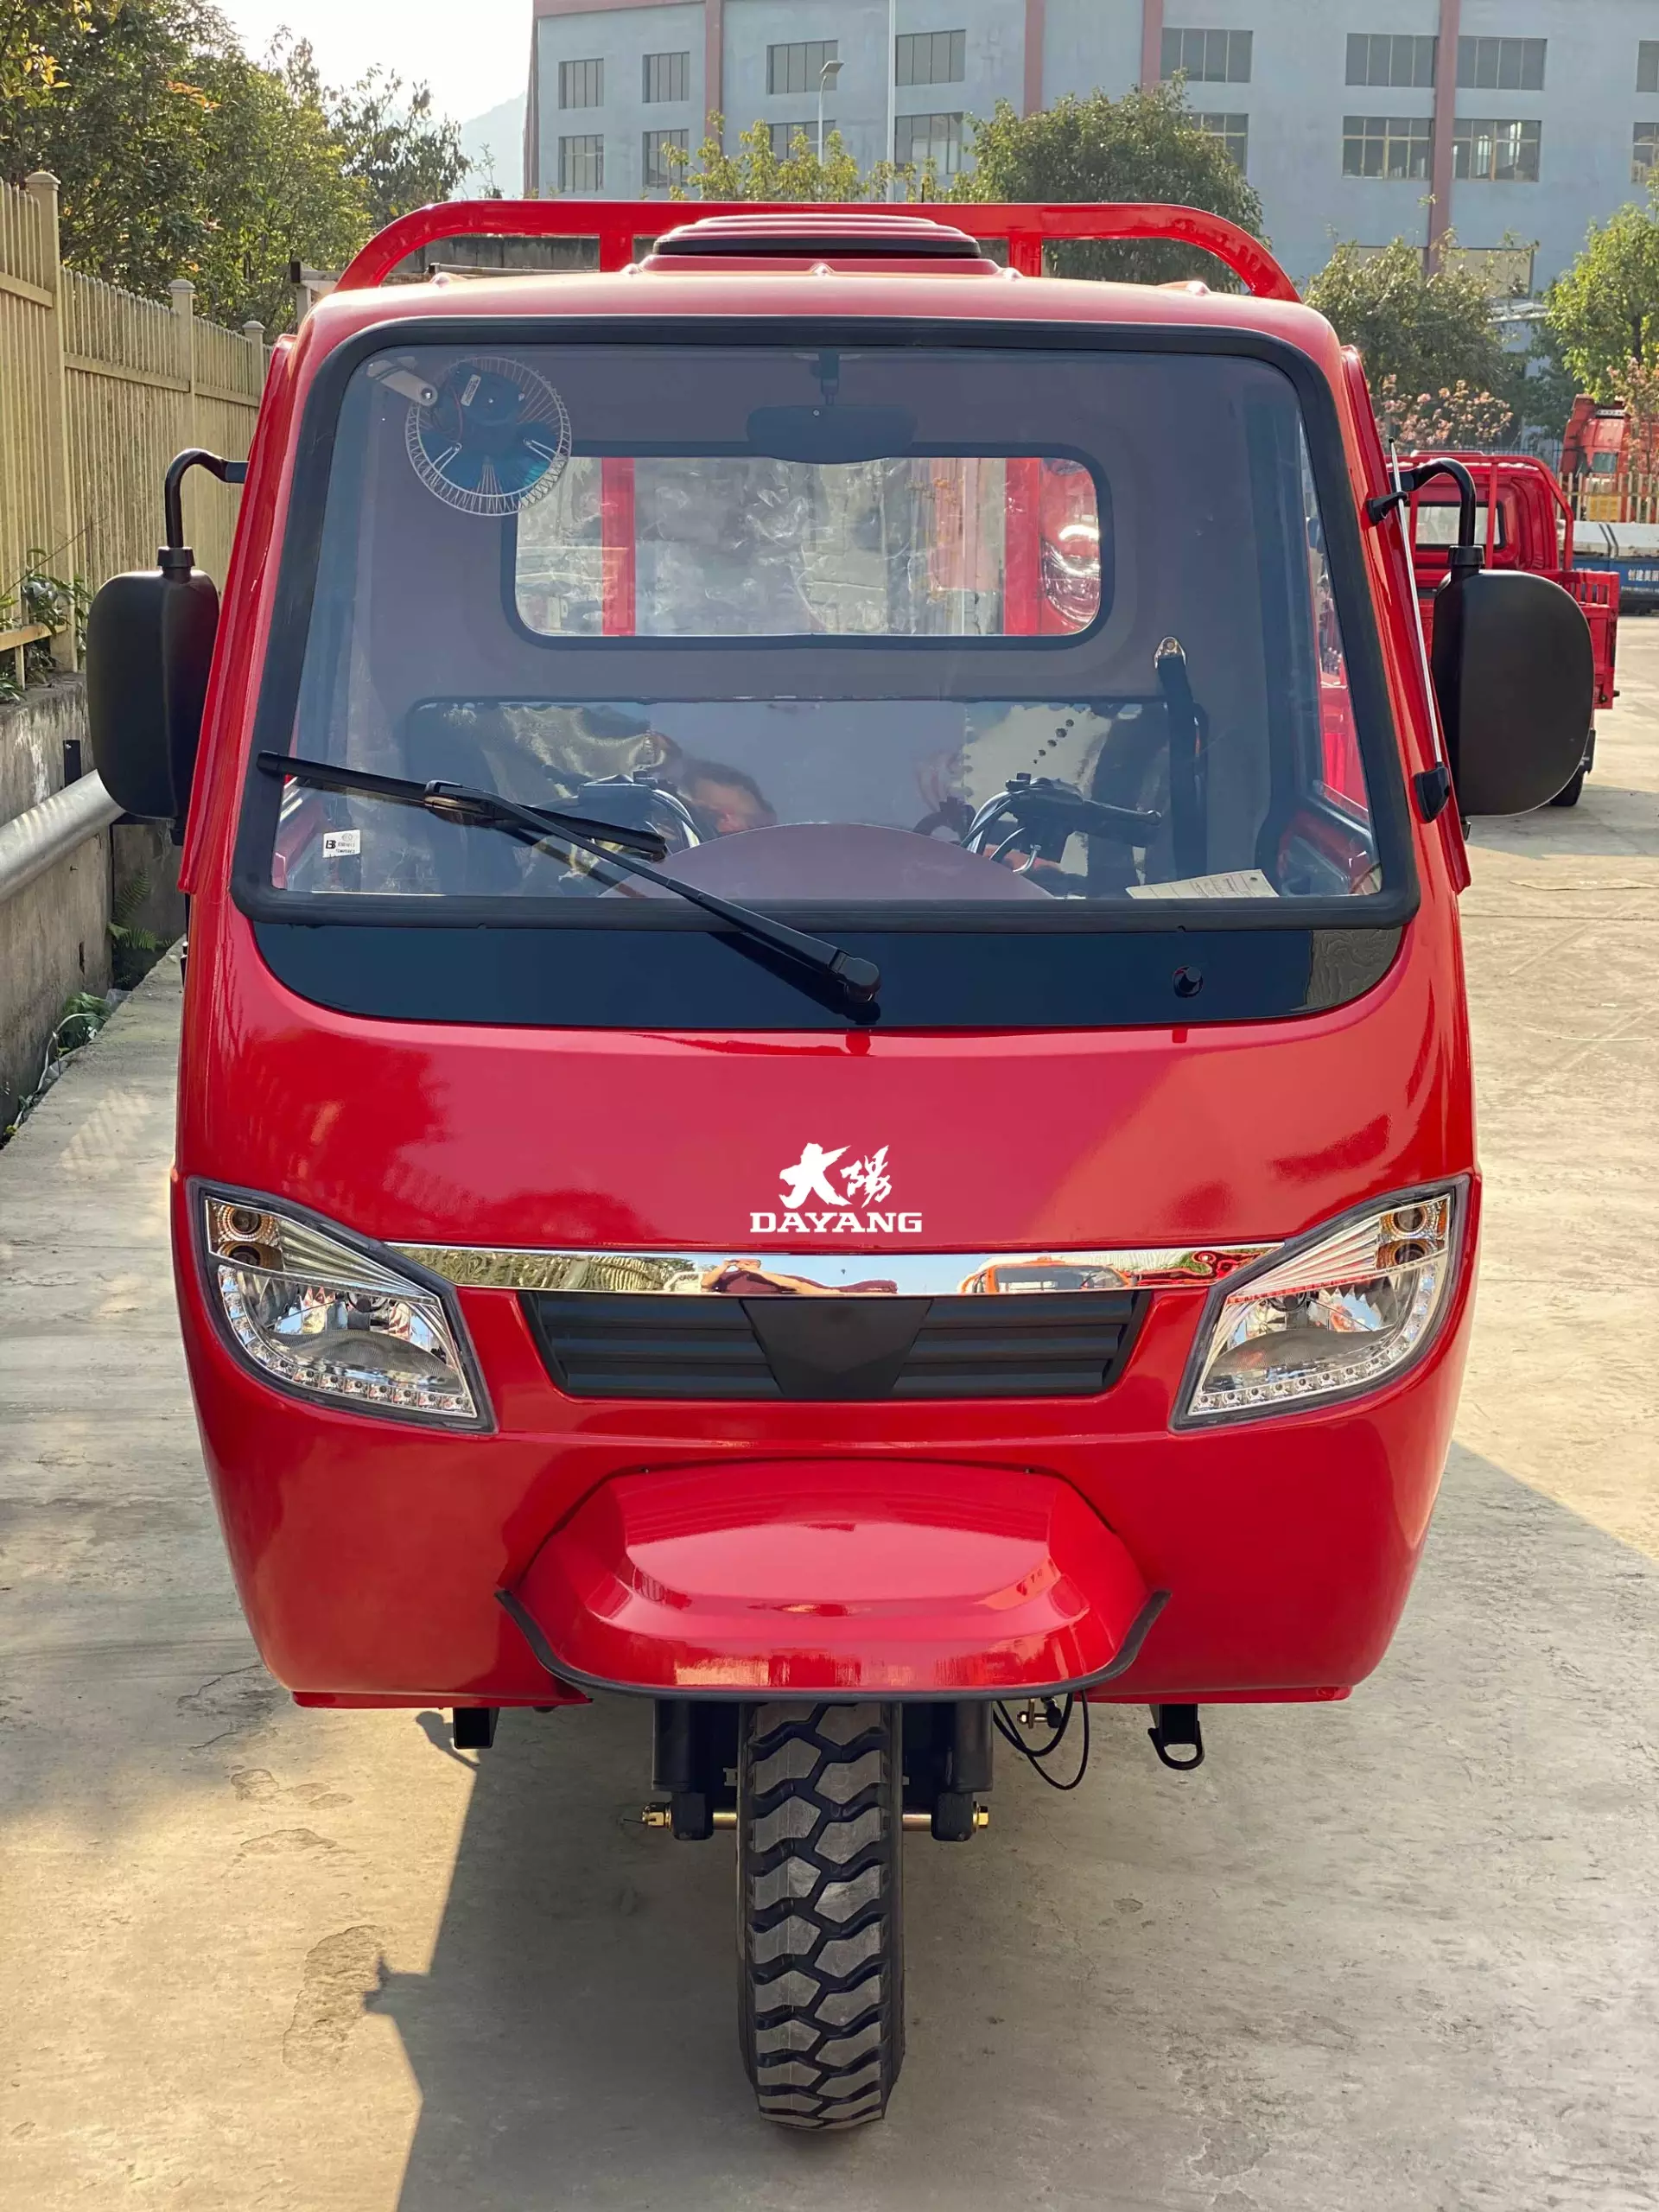 China Factory DAYANG Enclosed cabin cargo tricycle  200CC 250CC 300CC 350CC 3 wheels origin Type  Driving Size Product